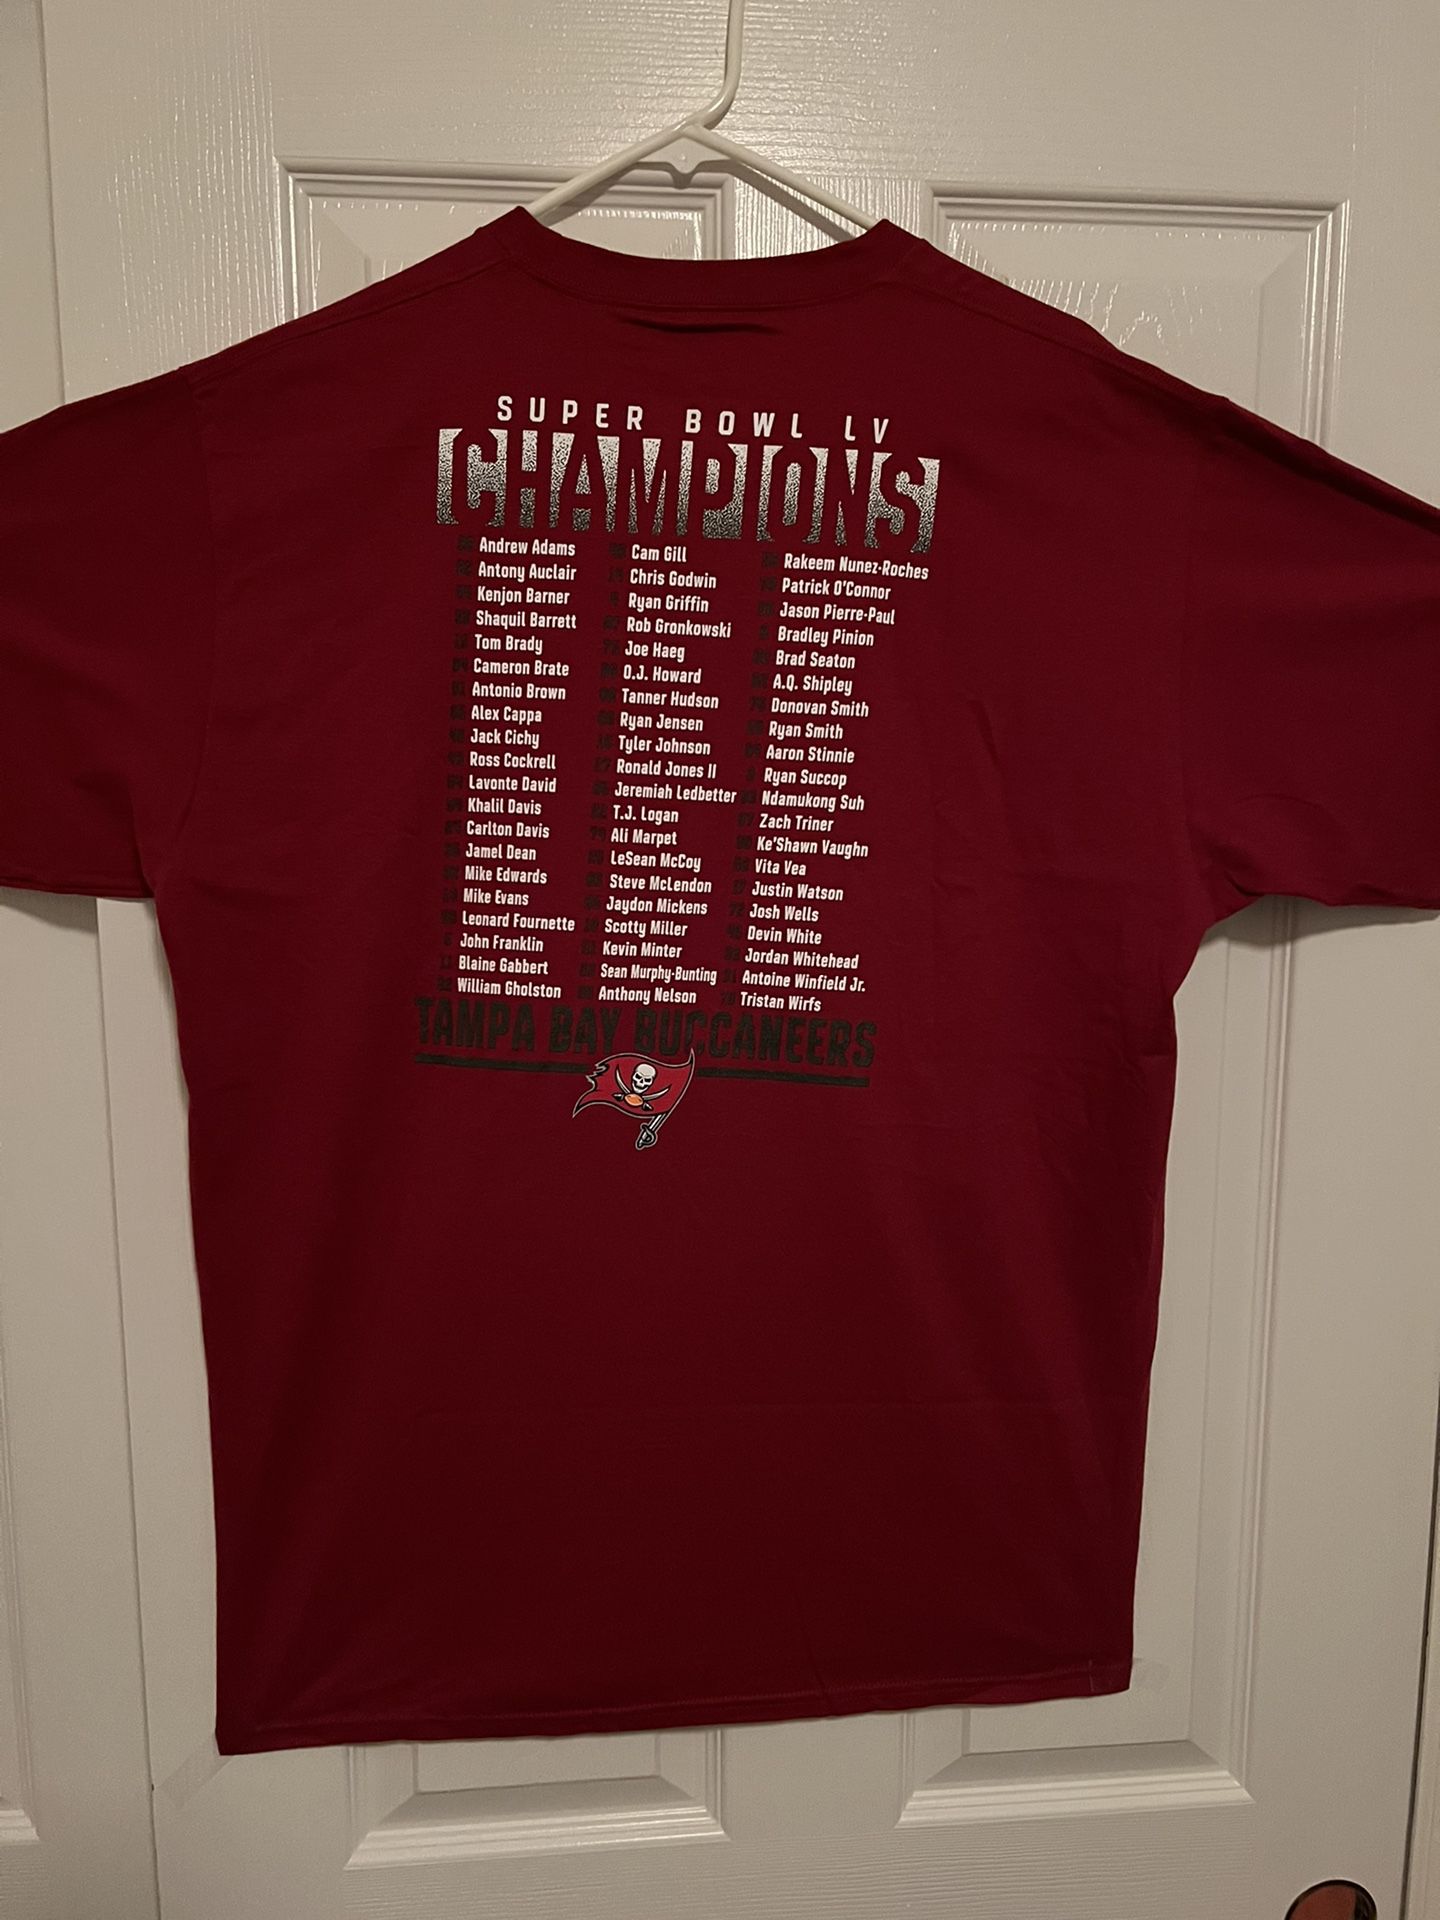 Tampa Bay Buccaneers Super Bowl LV T Shirts With Team Roster